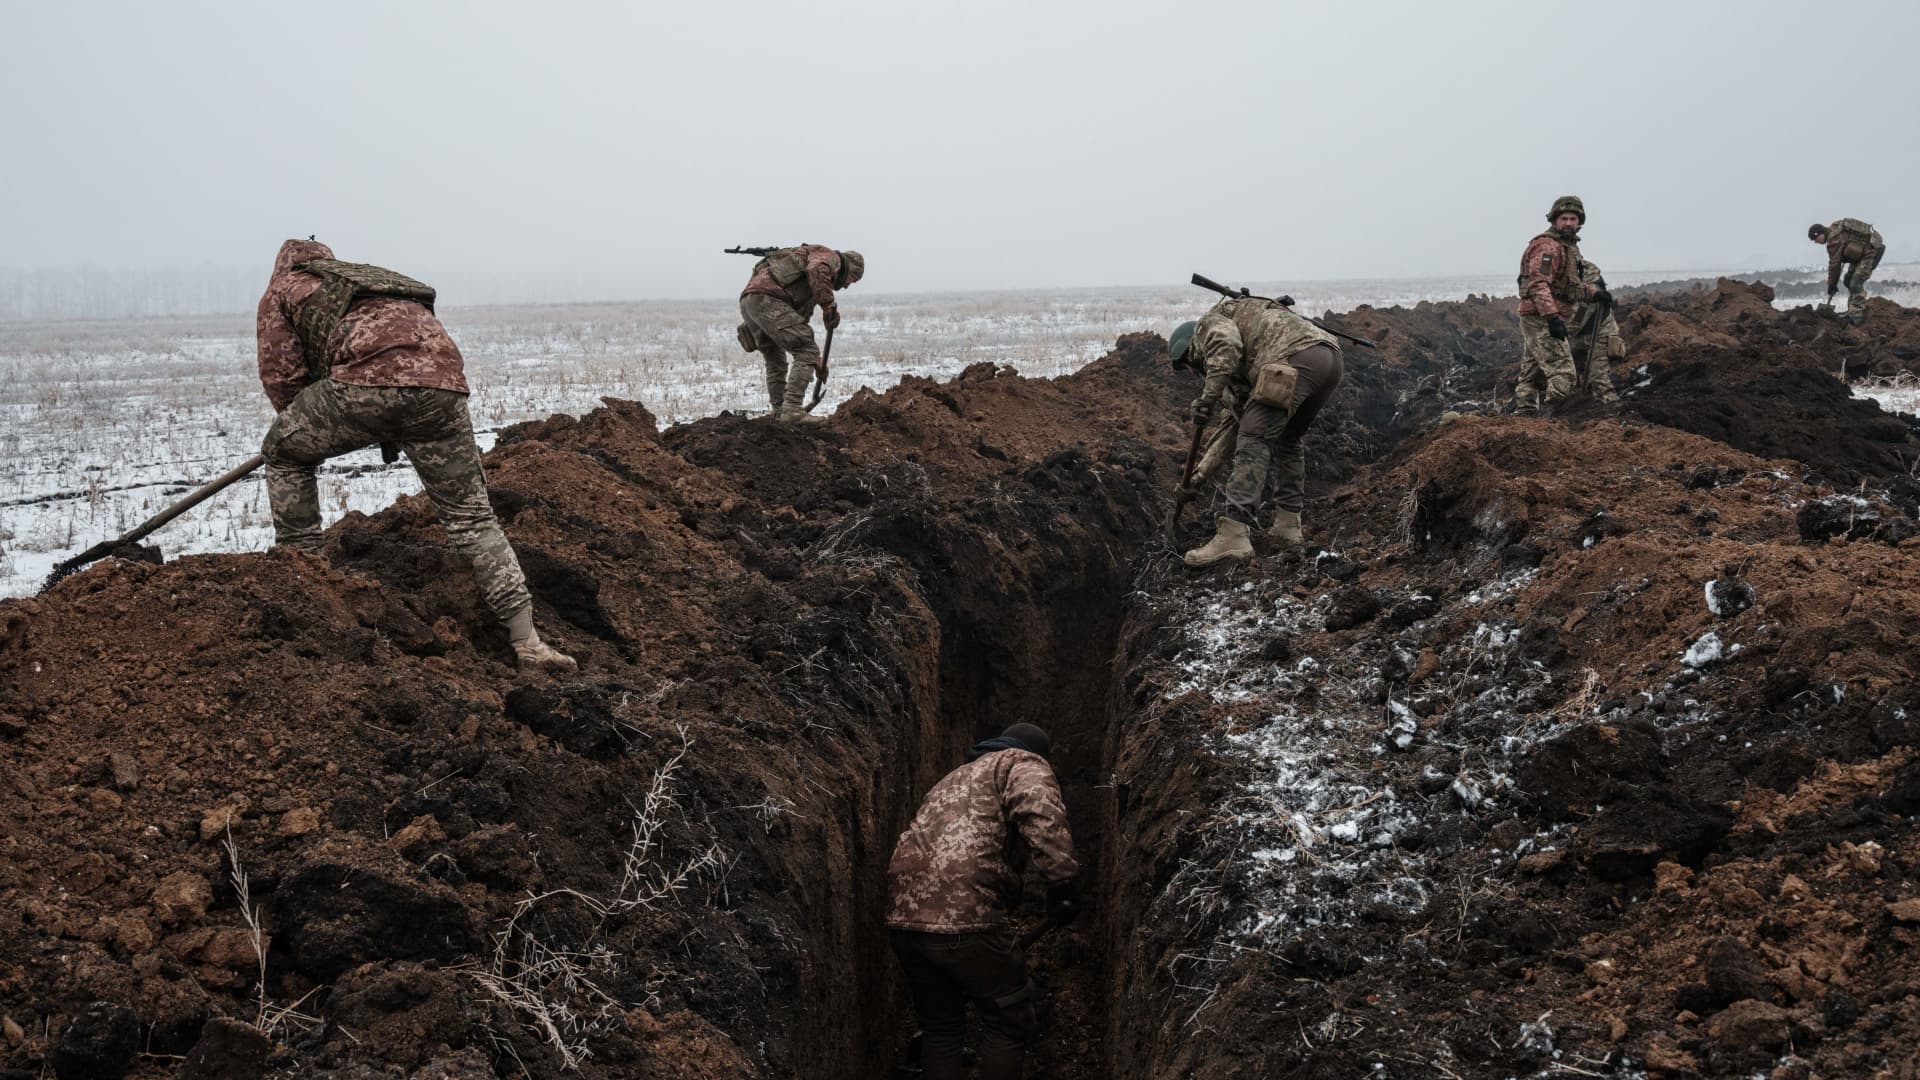 Ukrainian servicemen make a trench near Bakhmut on Feb. 1, 2023, as they prepare for a Russian offensive in the area.